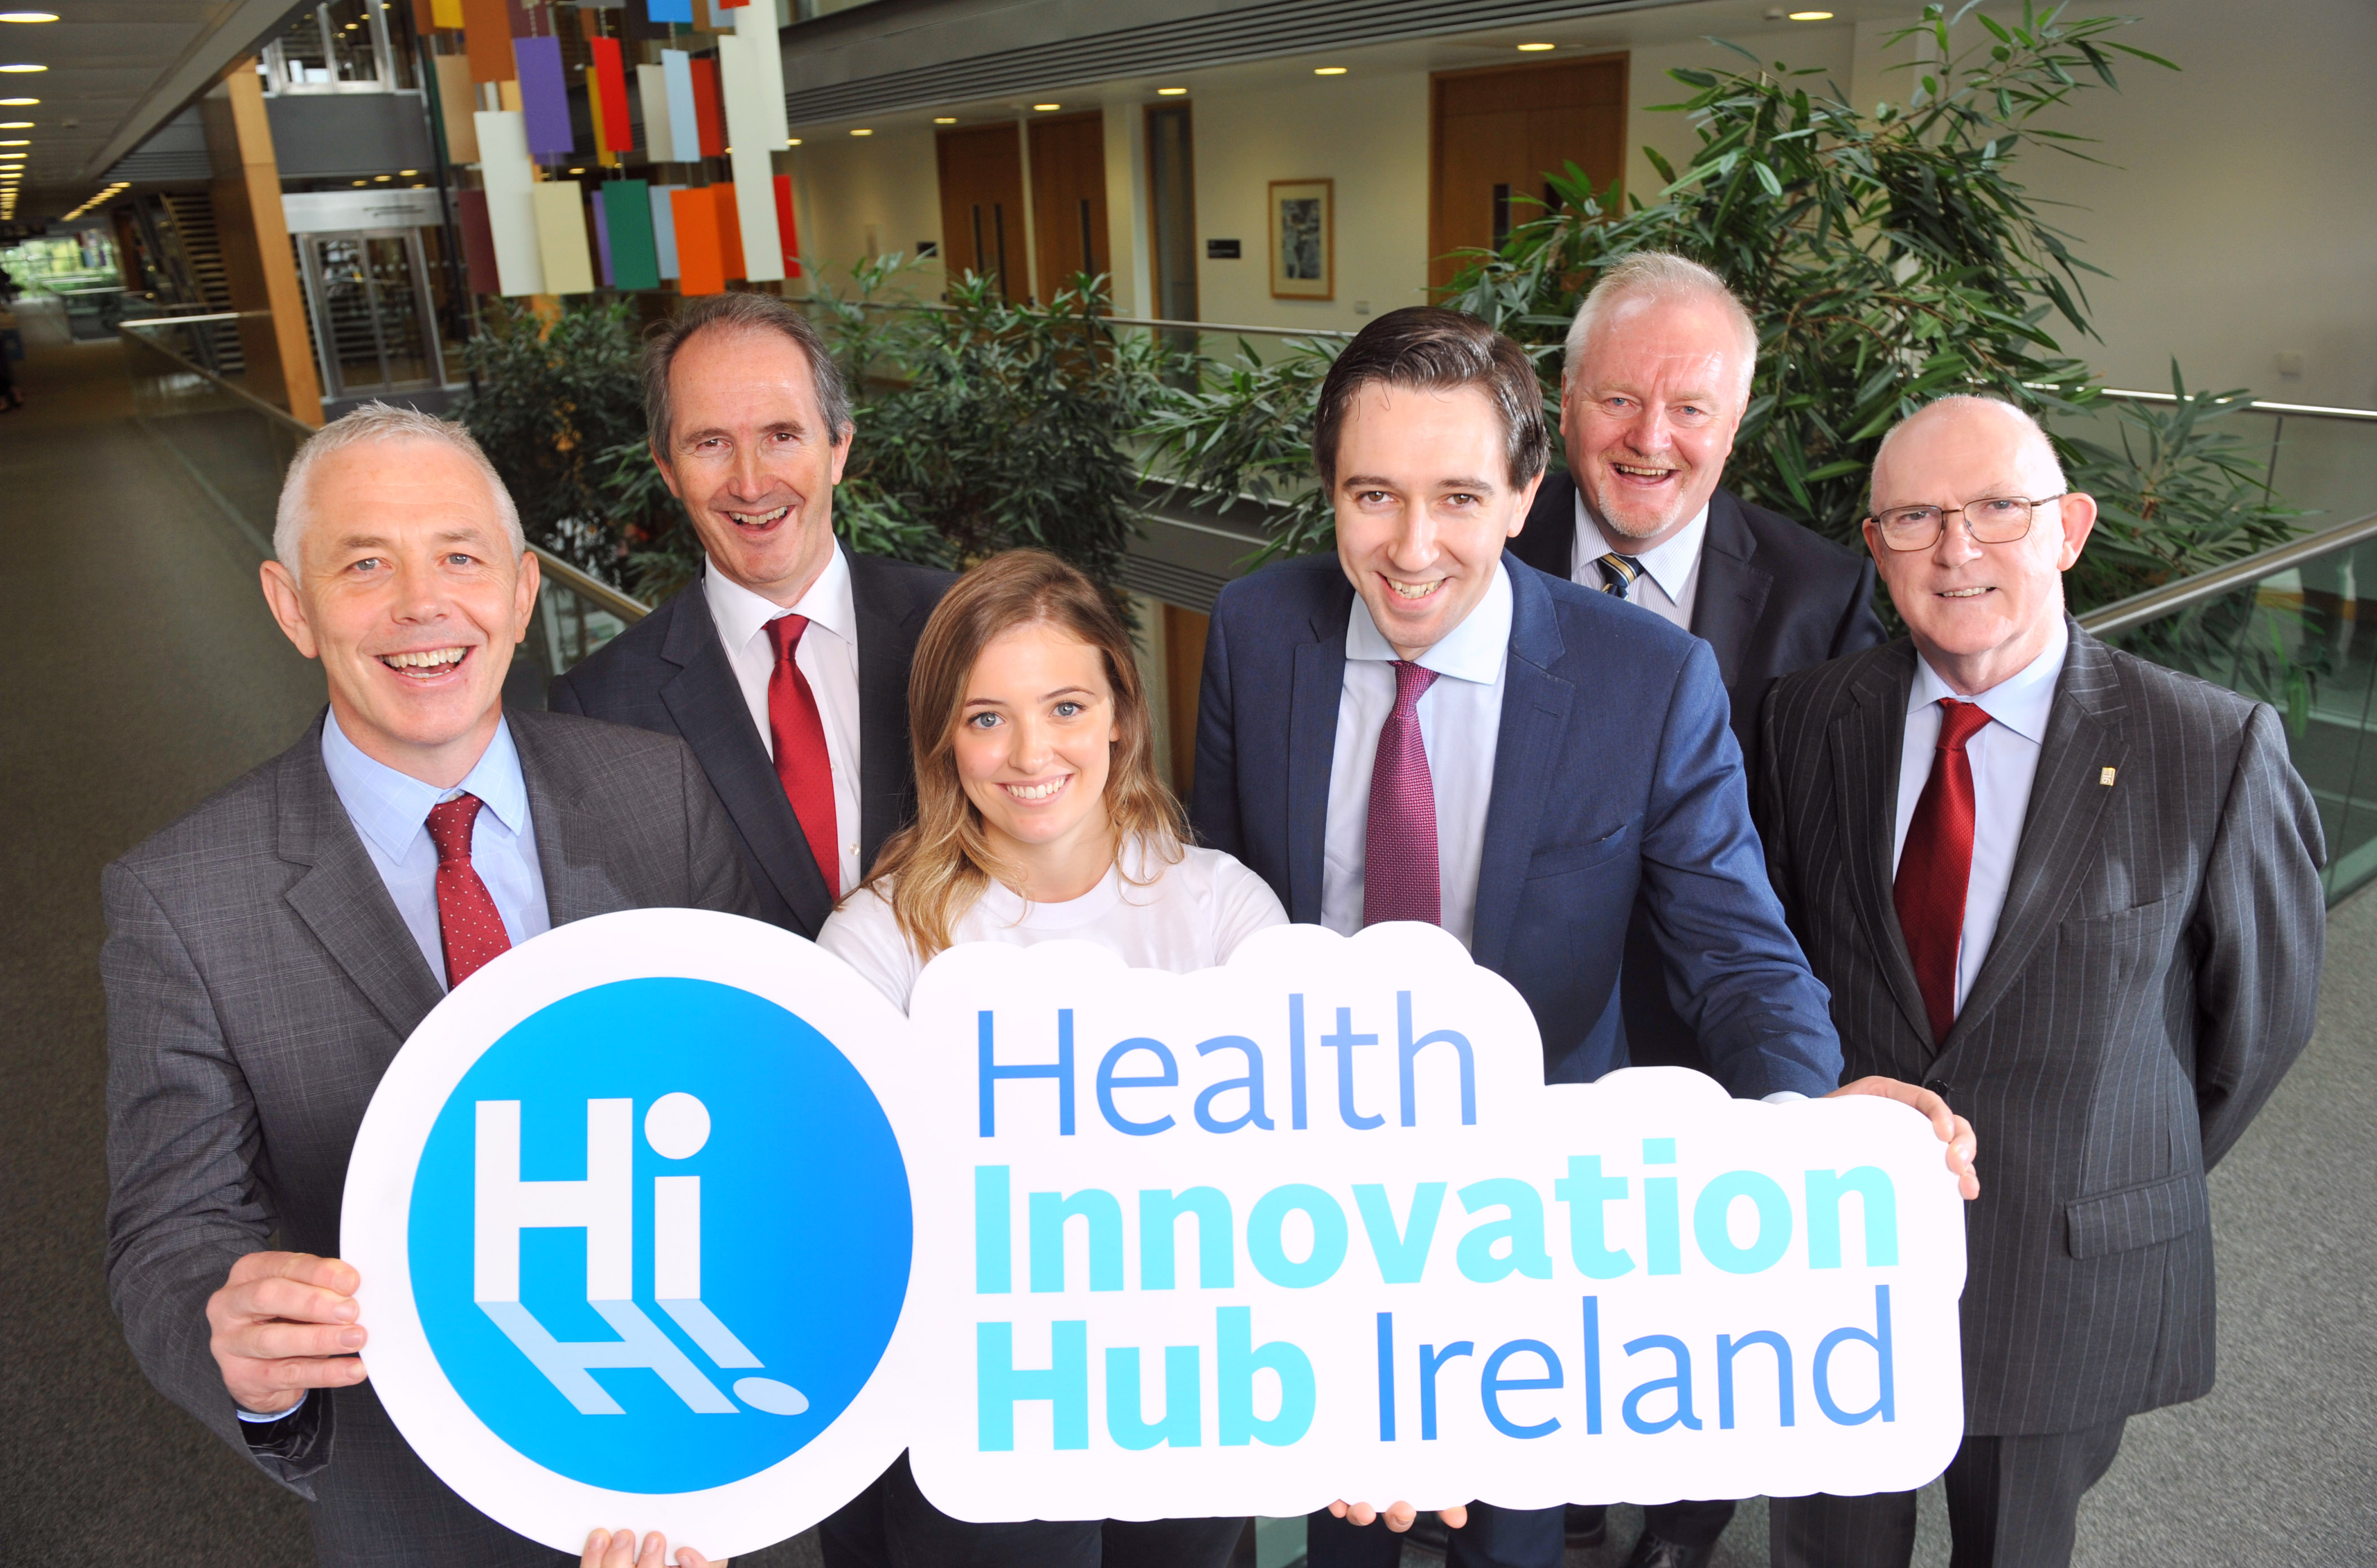 Health Innovation Hub Ireland launched by Minister Simon Harris TD 